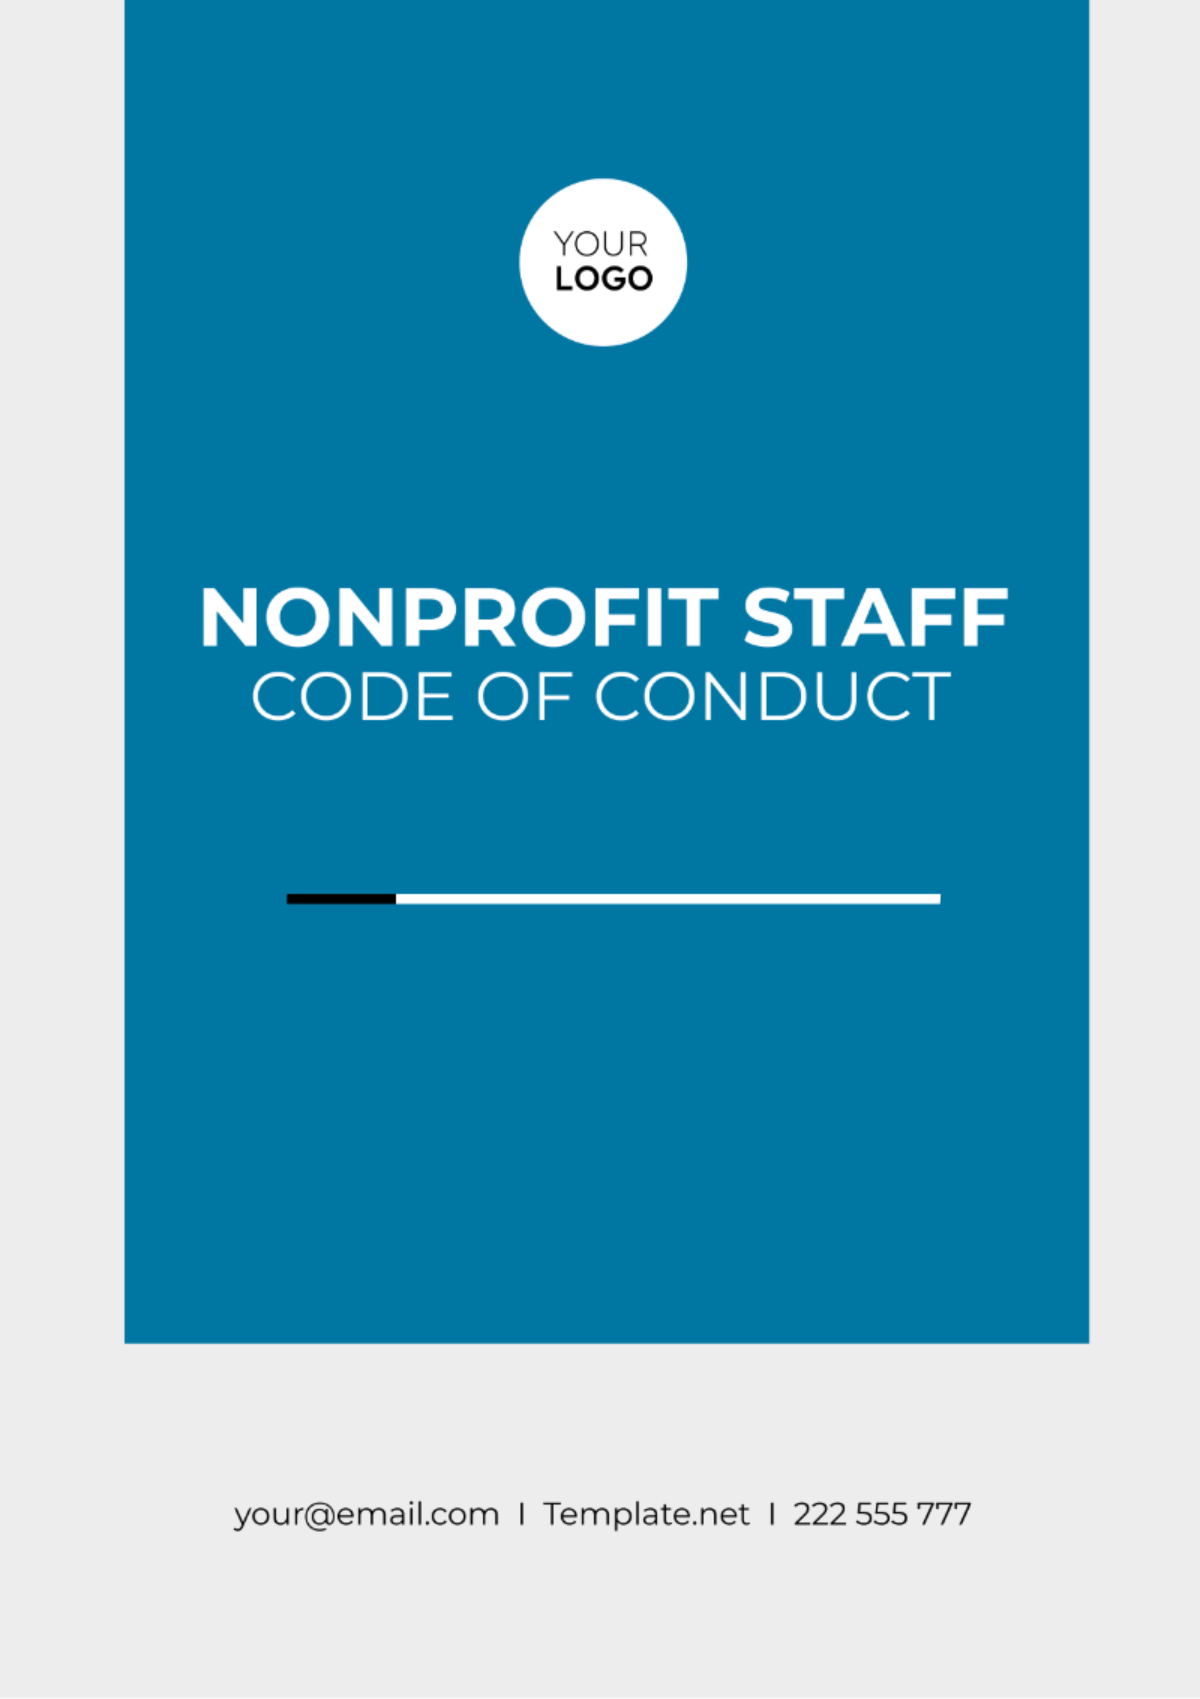 Nonprofit Staff Code of Conduct Template